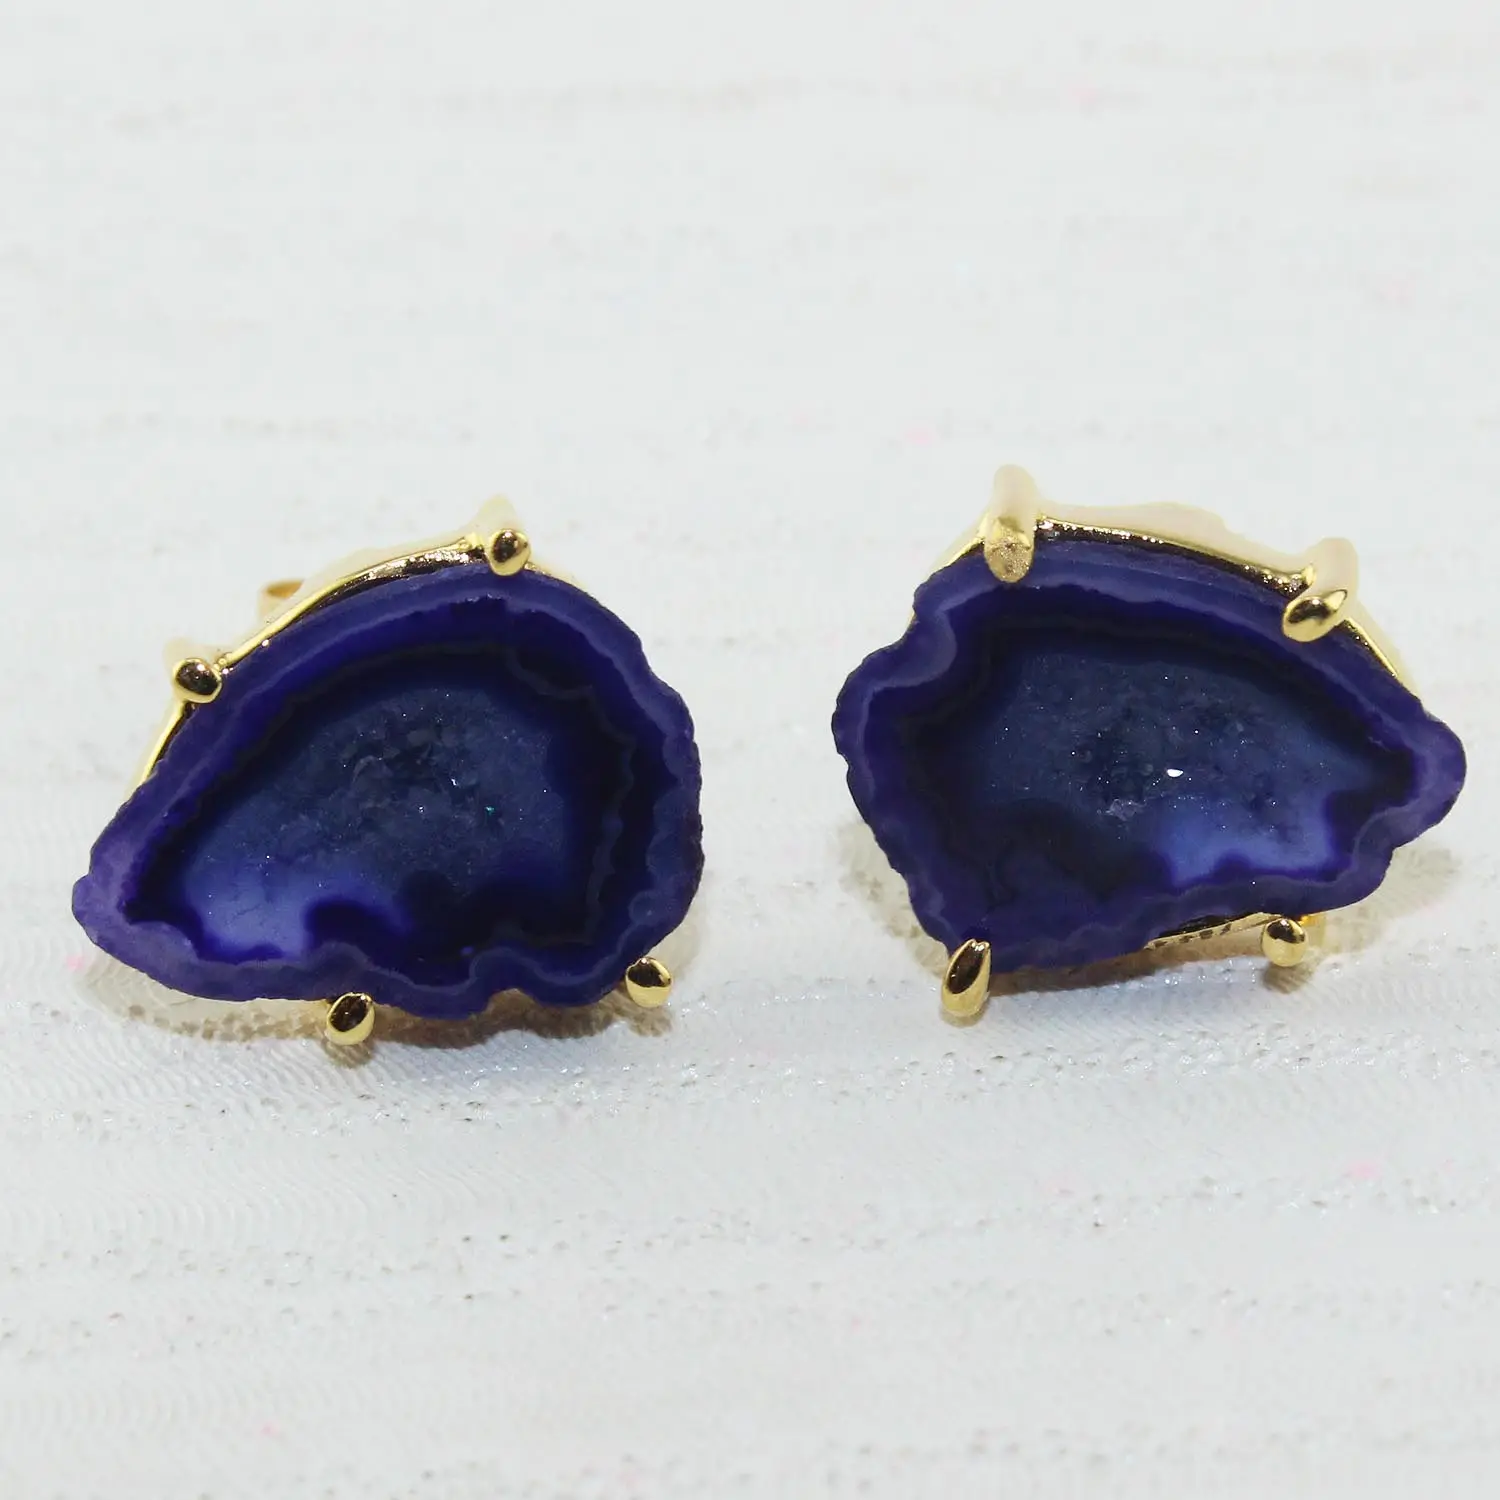 Wholesale Suppliers Zeva Jewels Natural Blue Geode Druzy Stud Earring Brass Yellow Gold Plated Prong Setting Ear Post Earrings